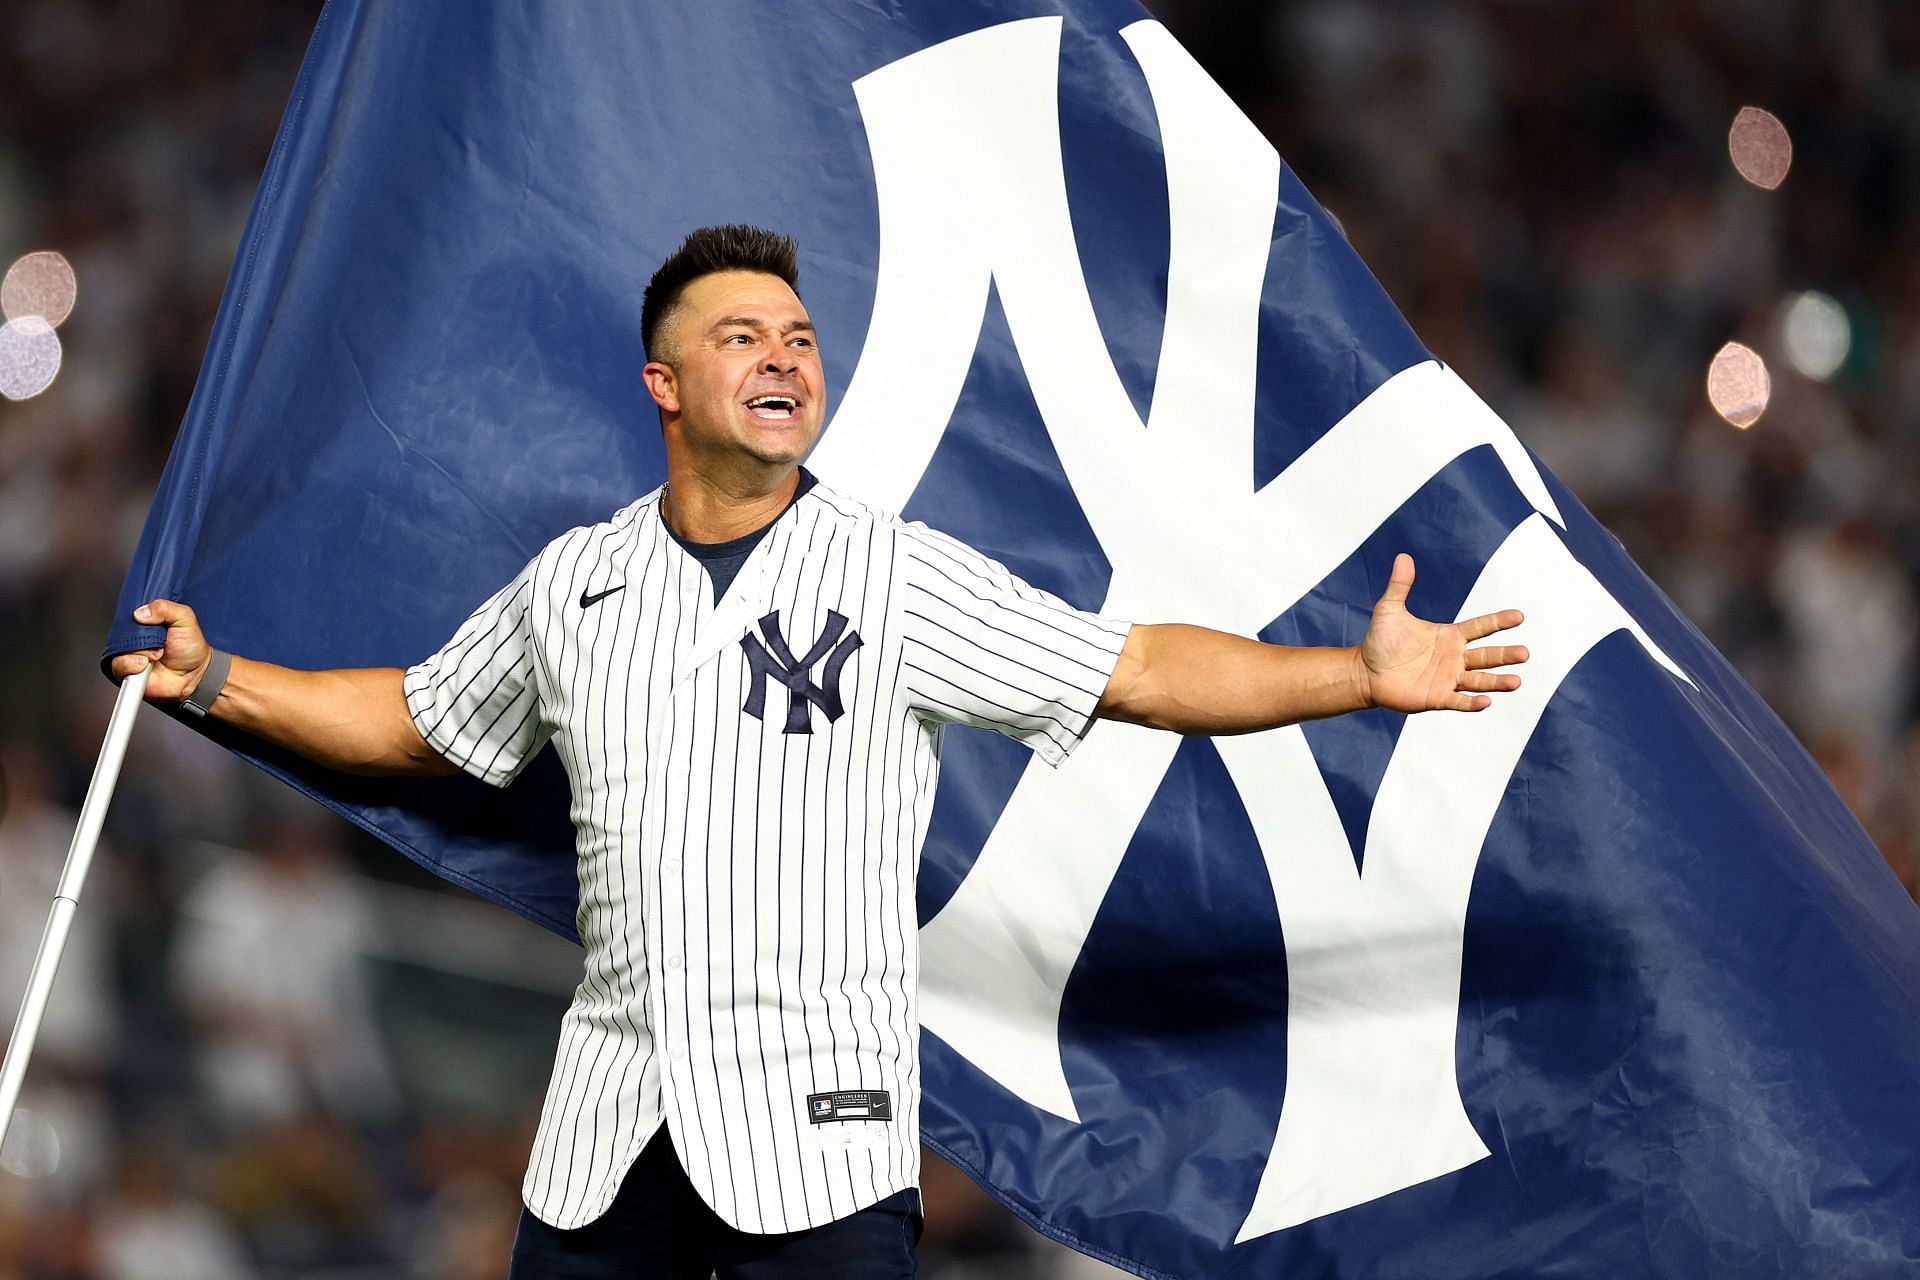 Former MLB All-Star and World Series champion Nick Swisher joins